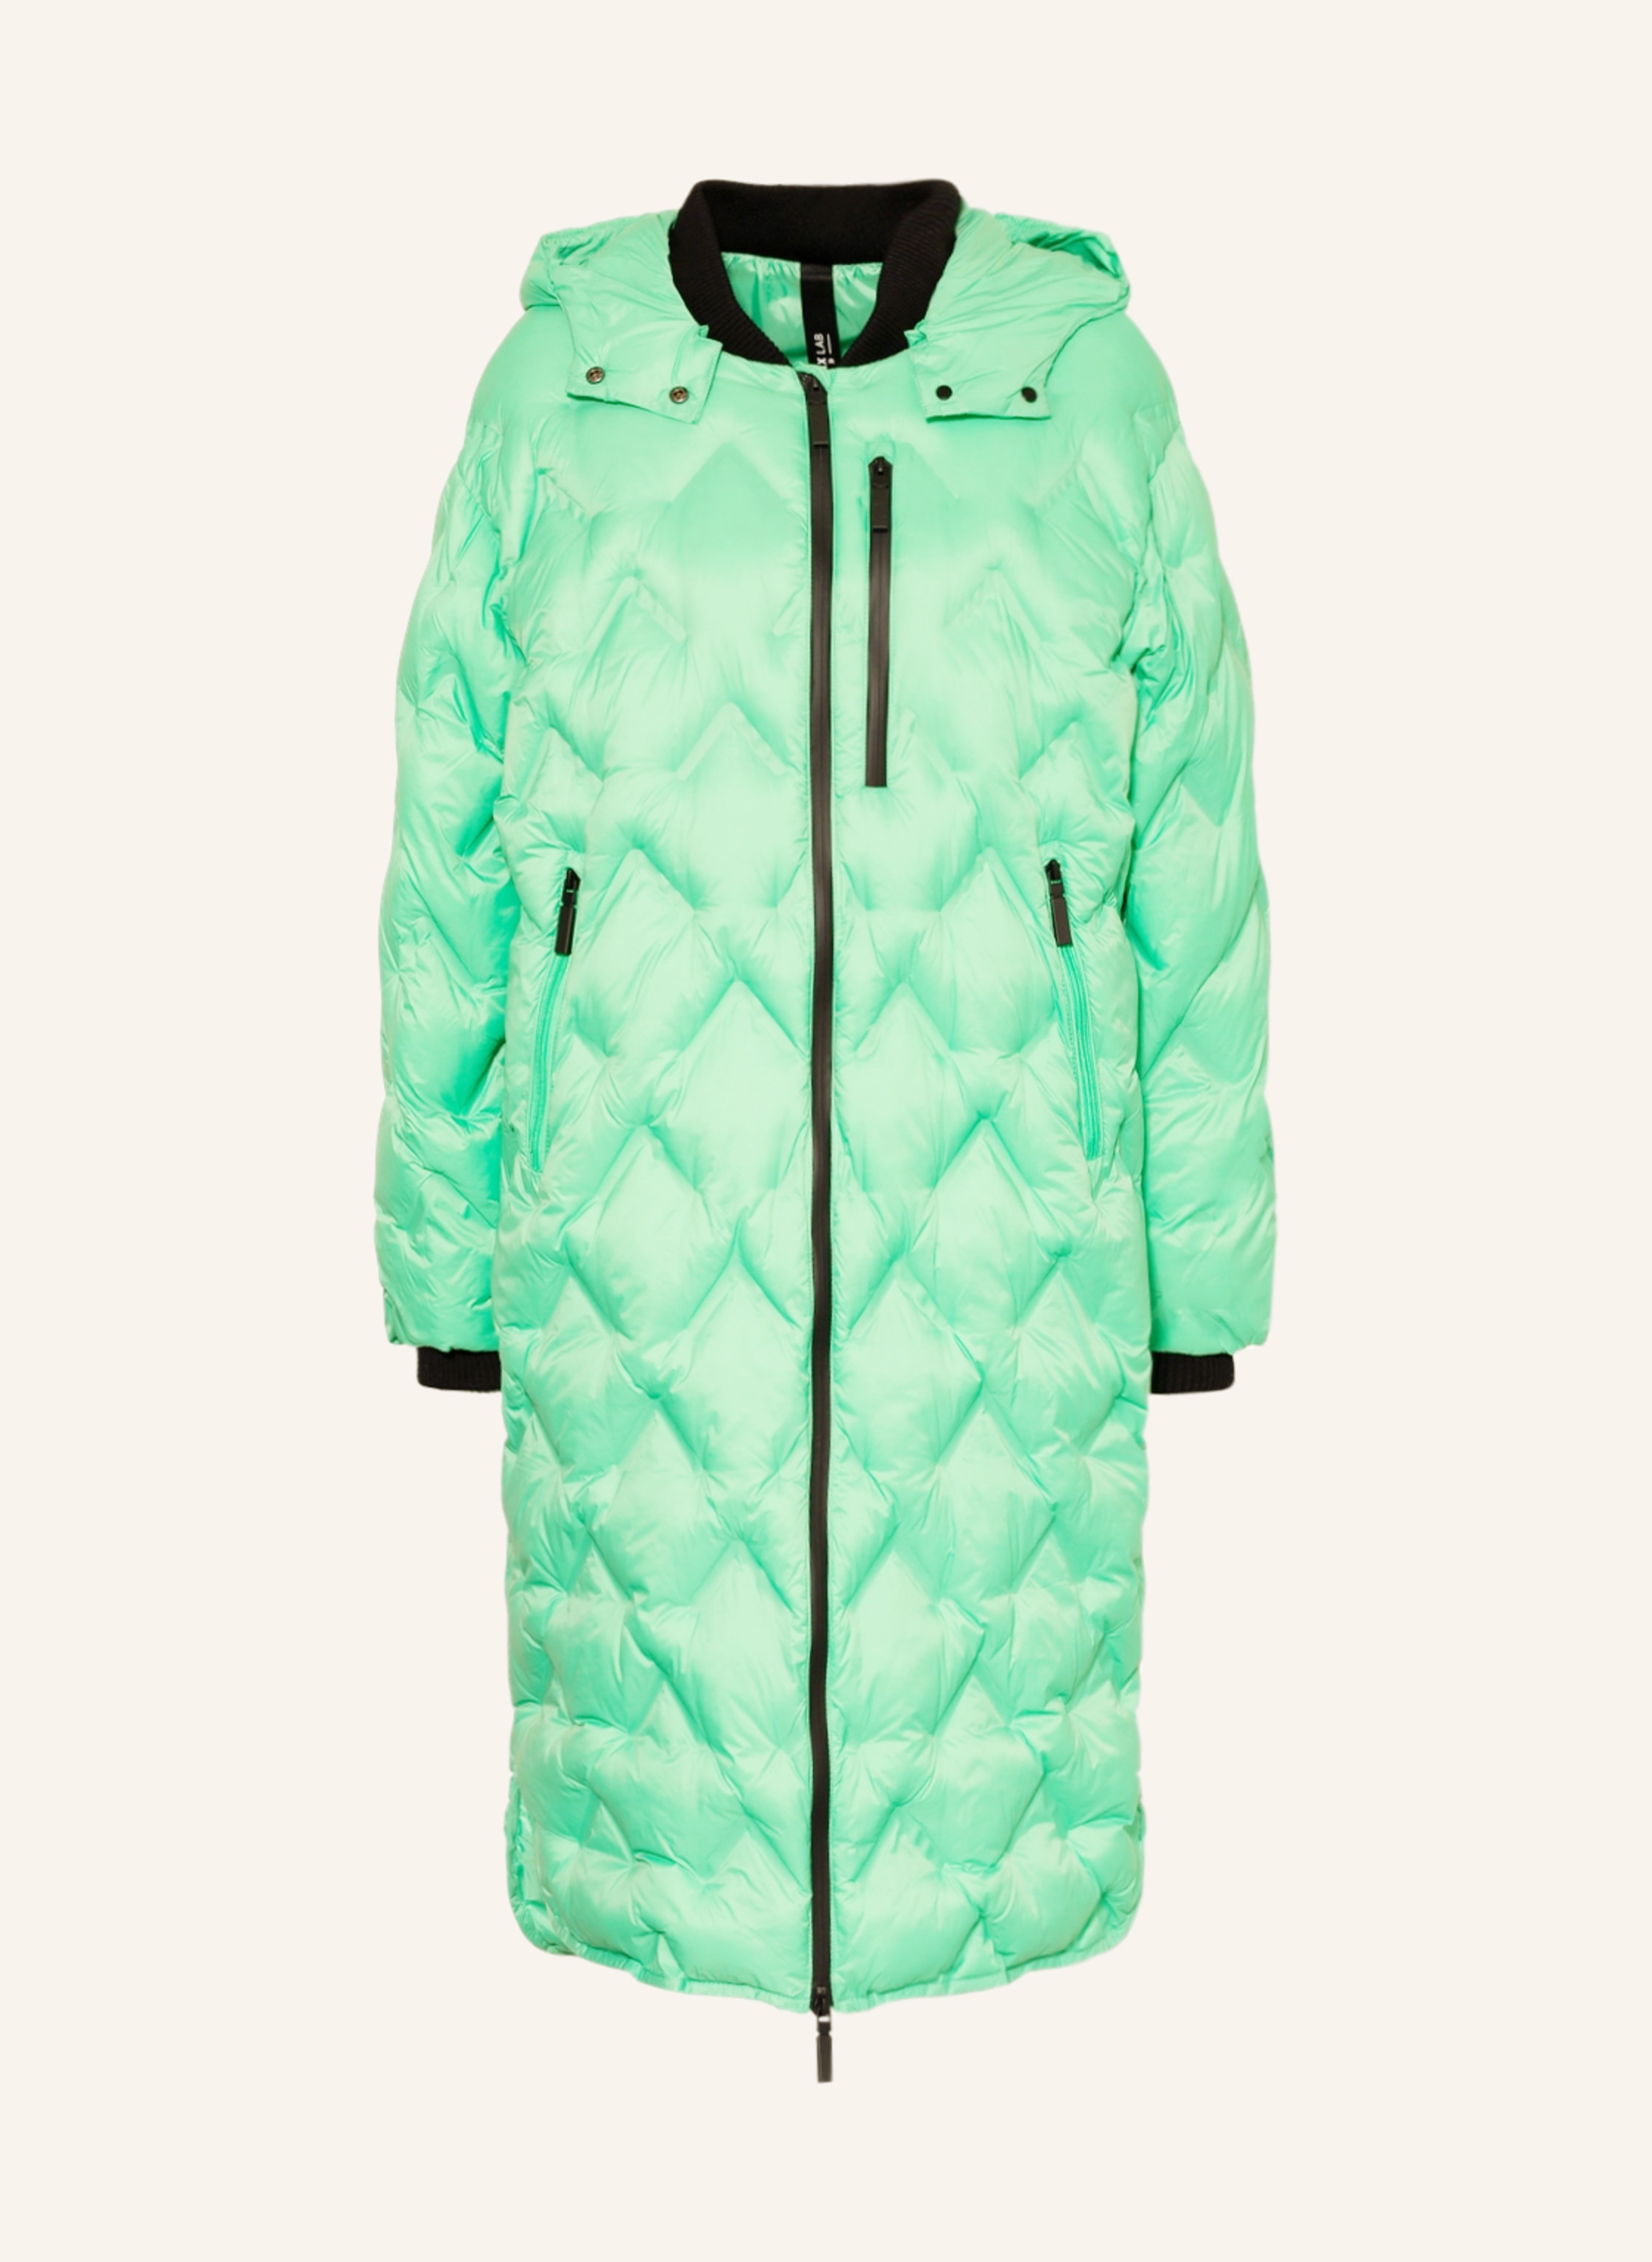 hood BRAX green in coat Quilted FRANZY detachable with light